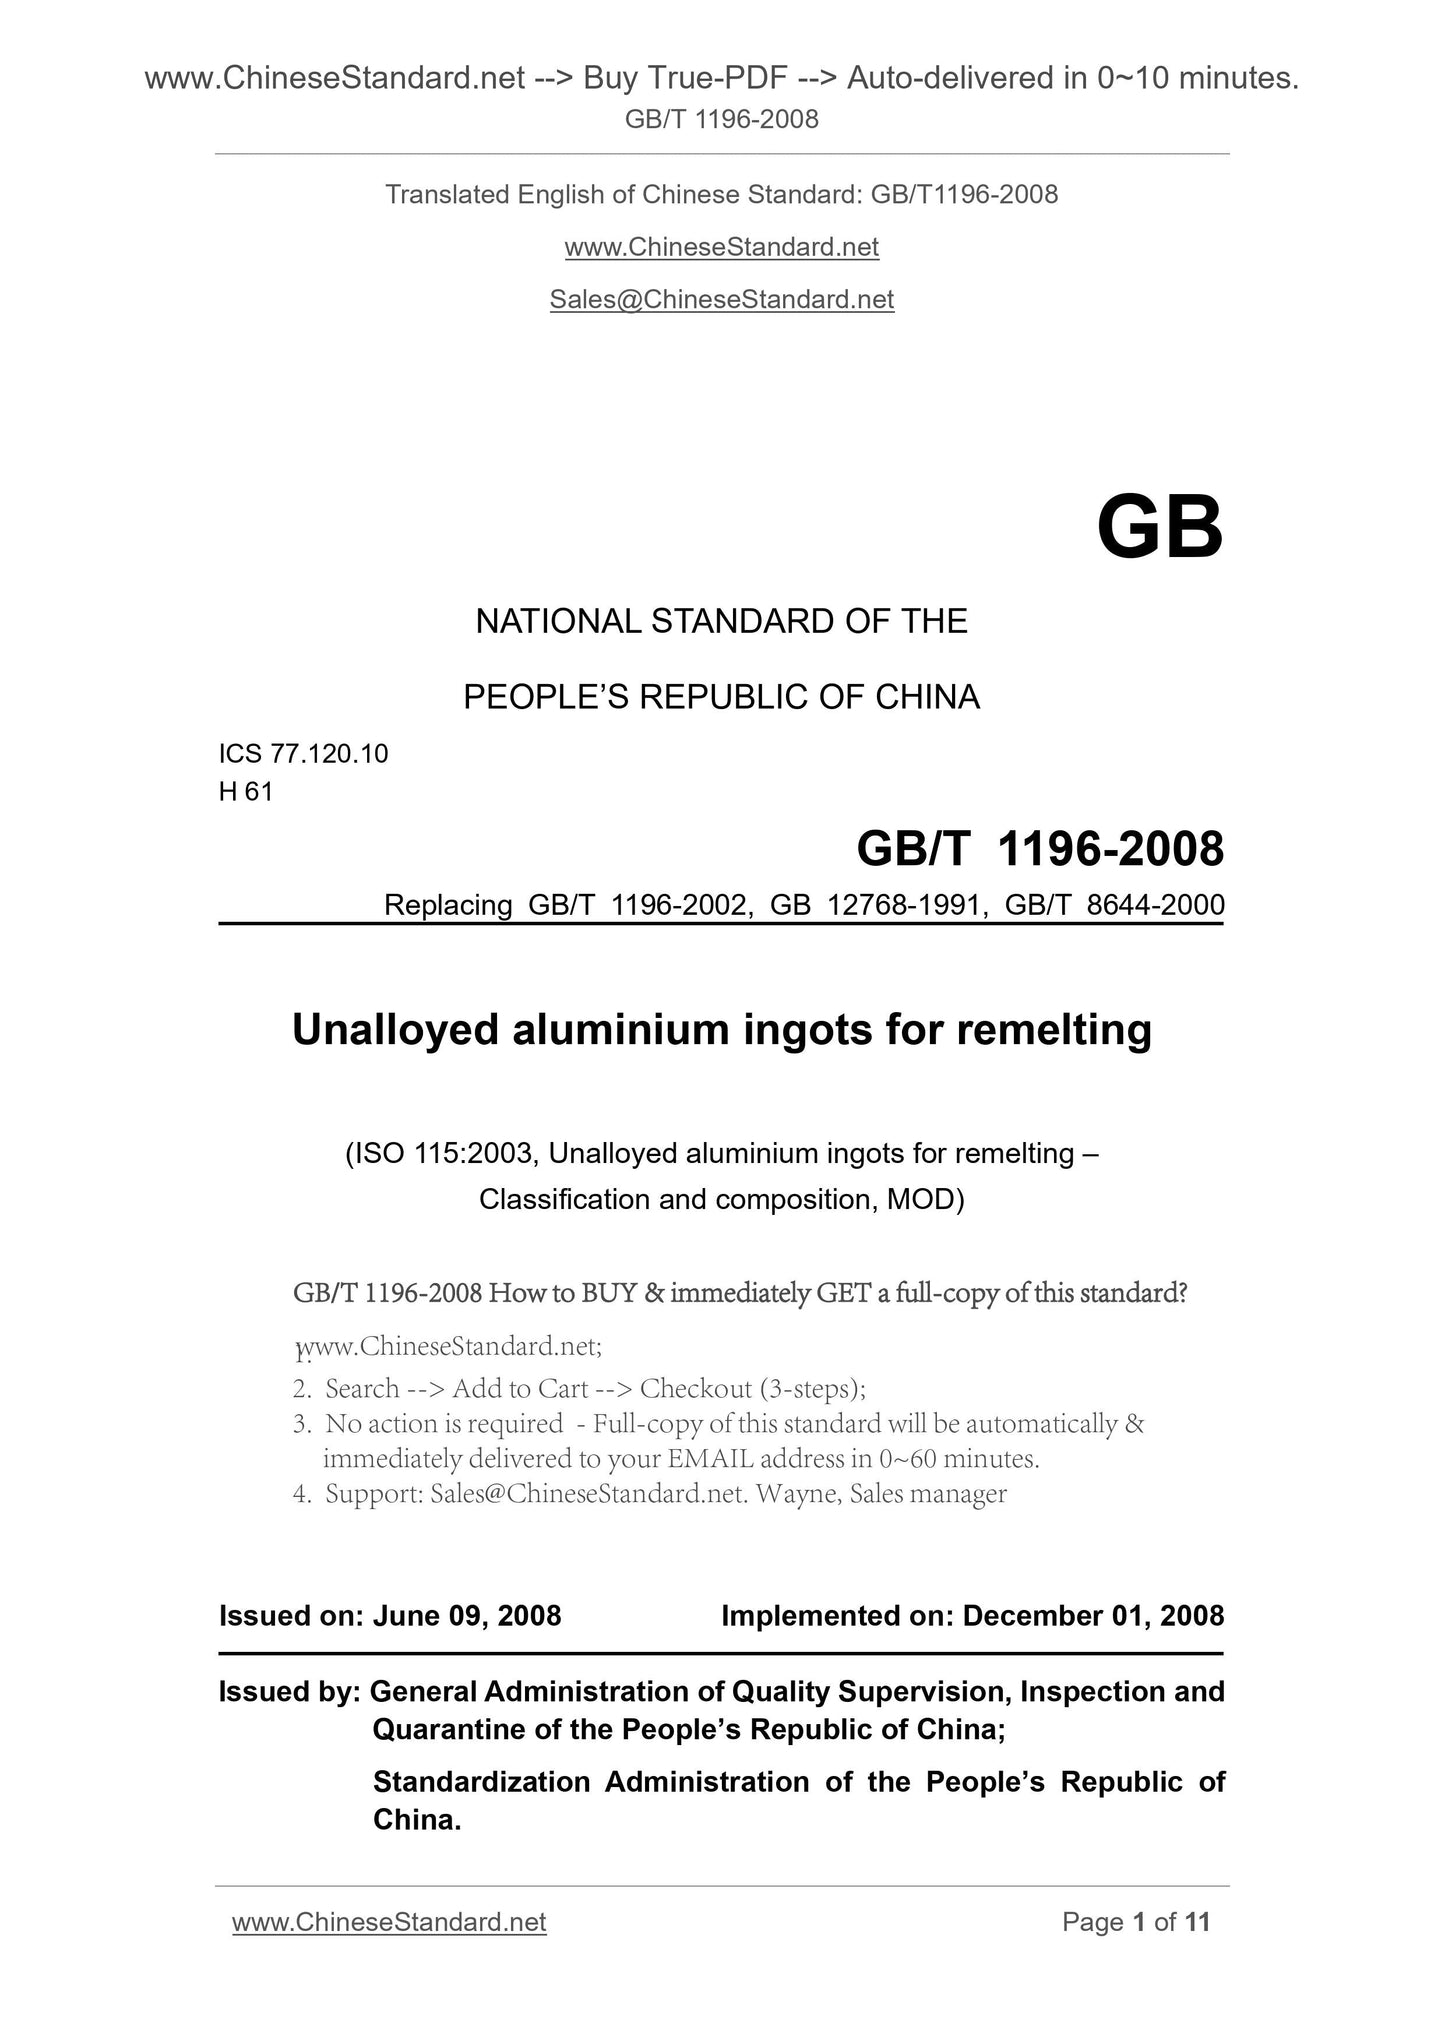 GB/T 1196-2008 Page 1